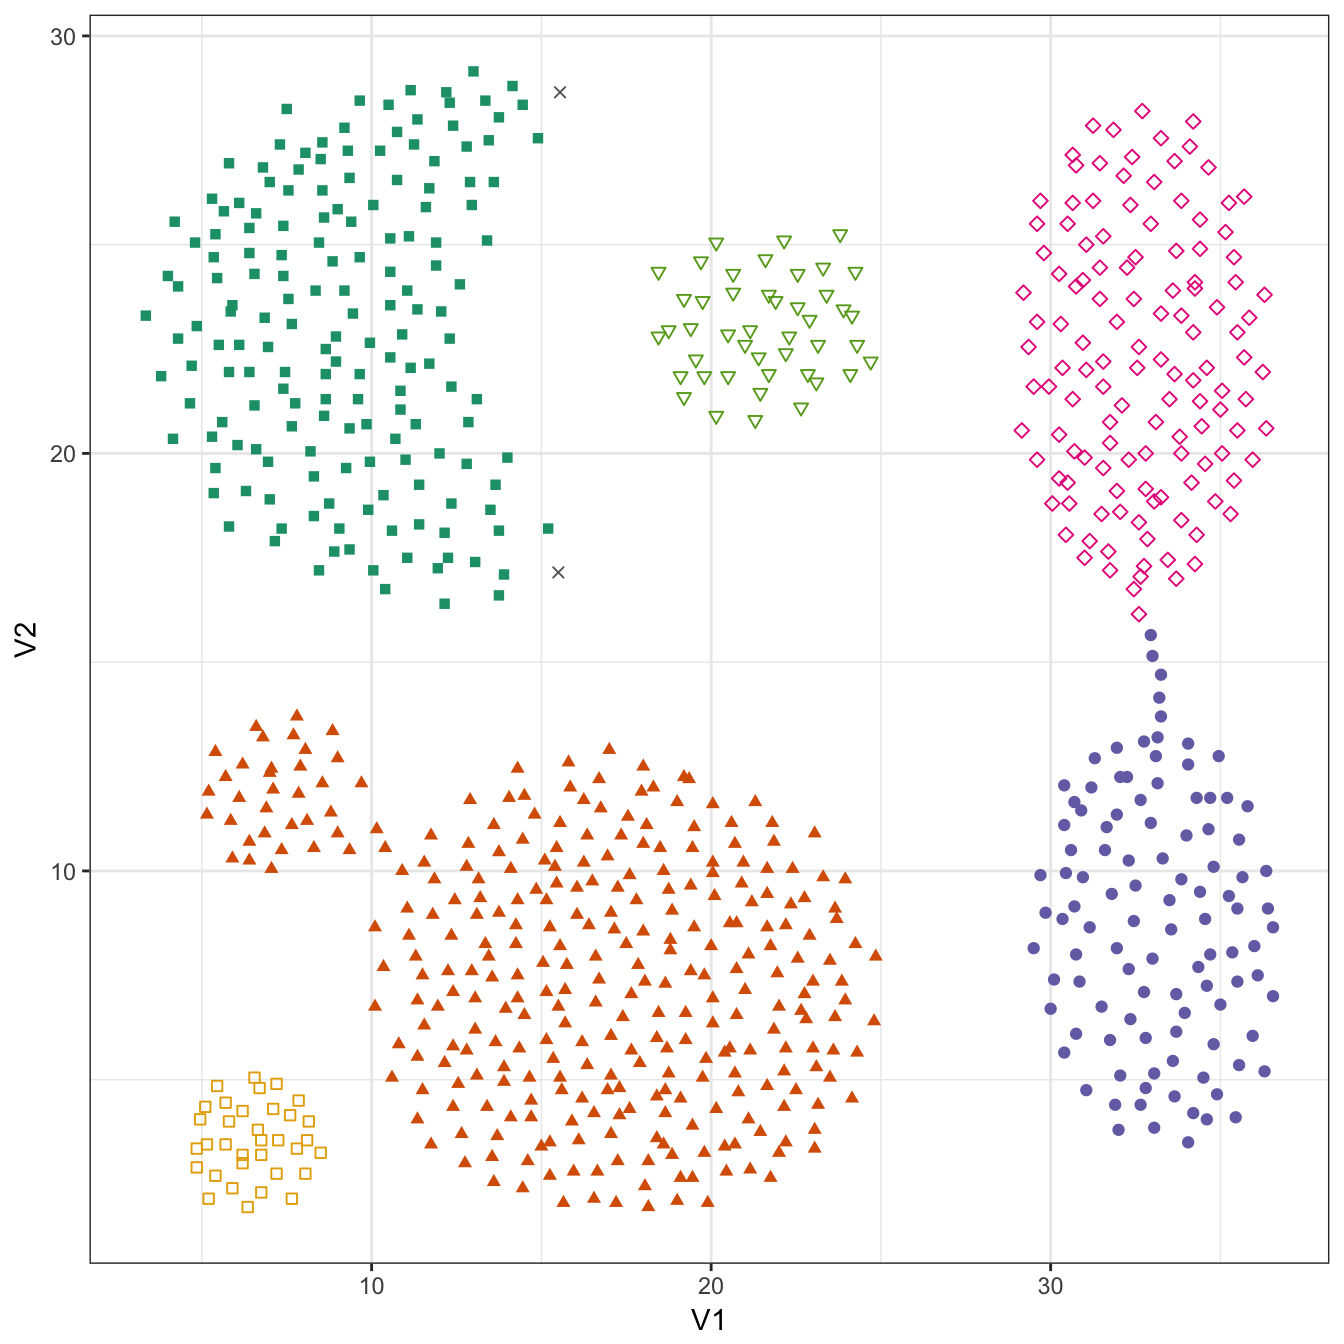 DBSCAN clustering (eps=1.8, minPts=10) of the aggregation data set. Outlier observations are shown as grey crosses.